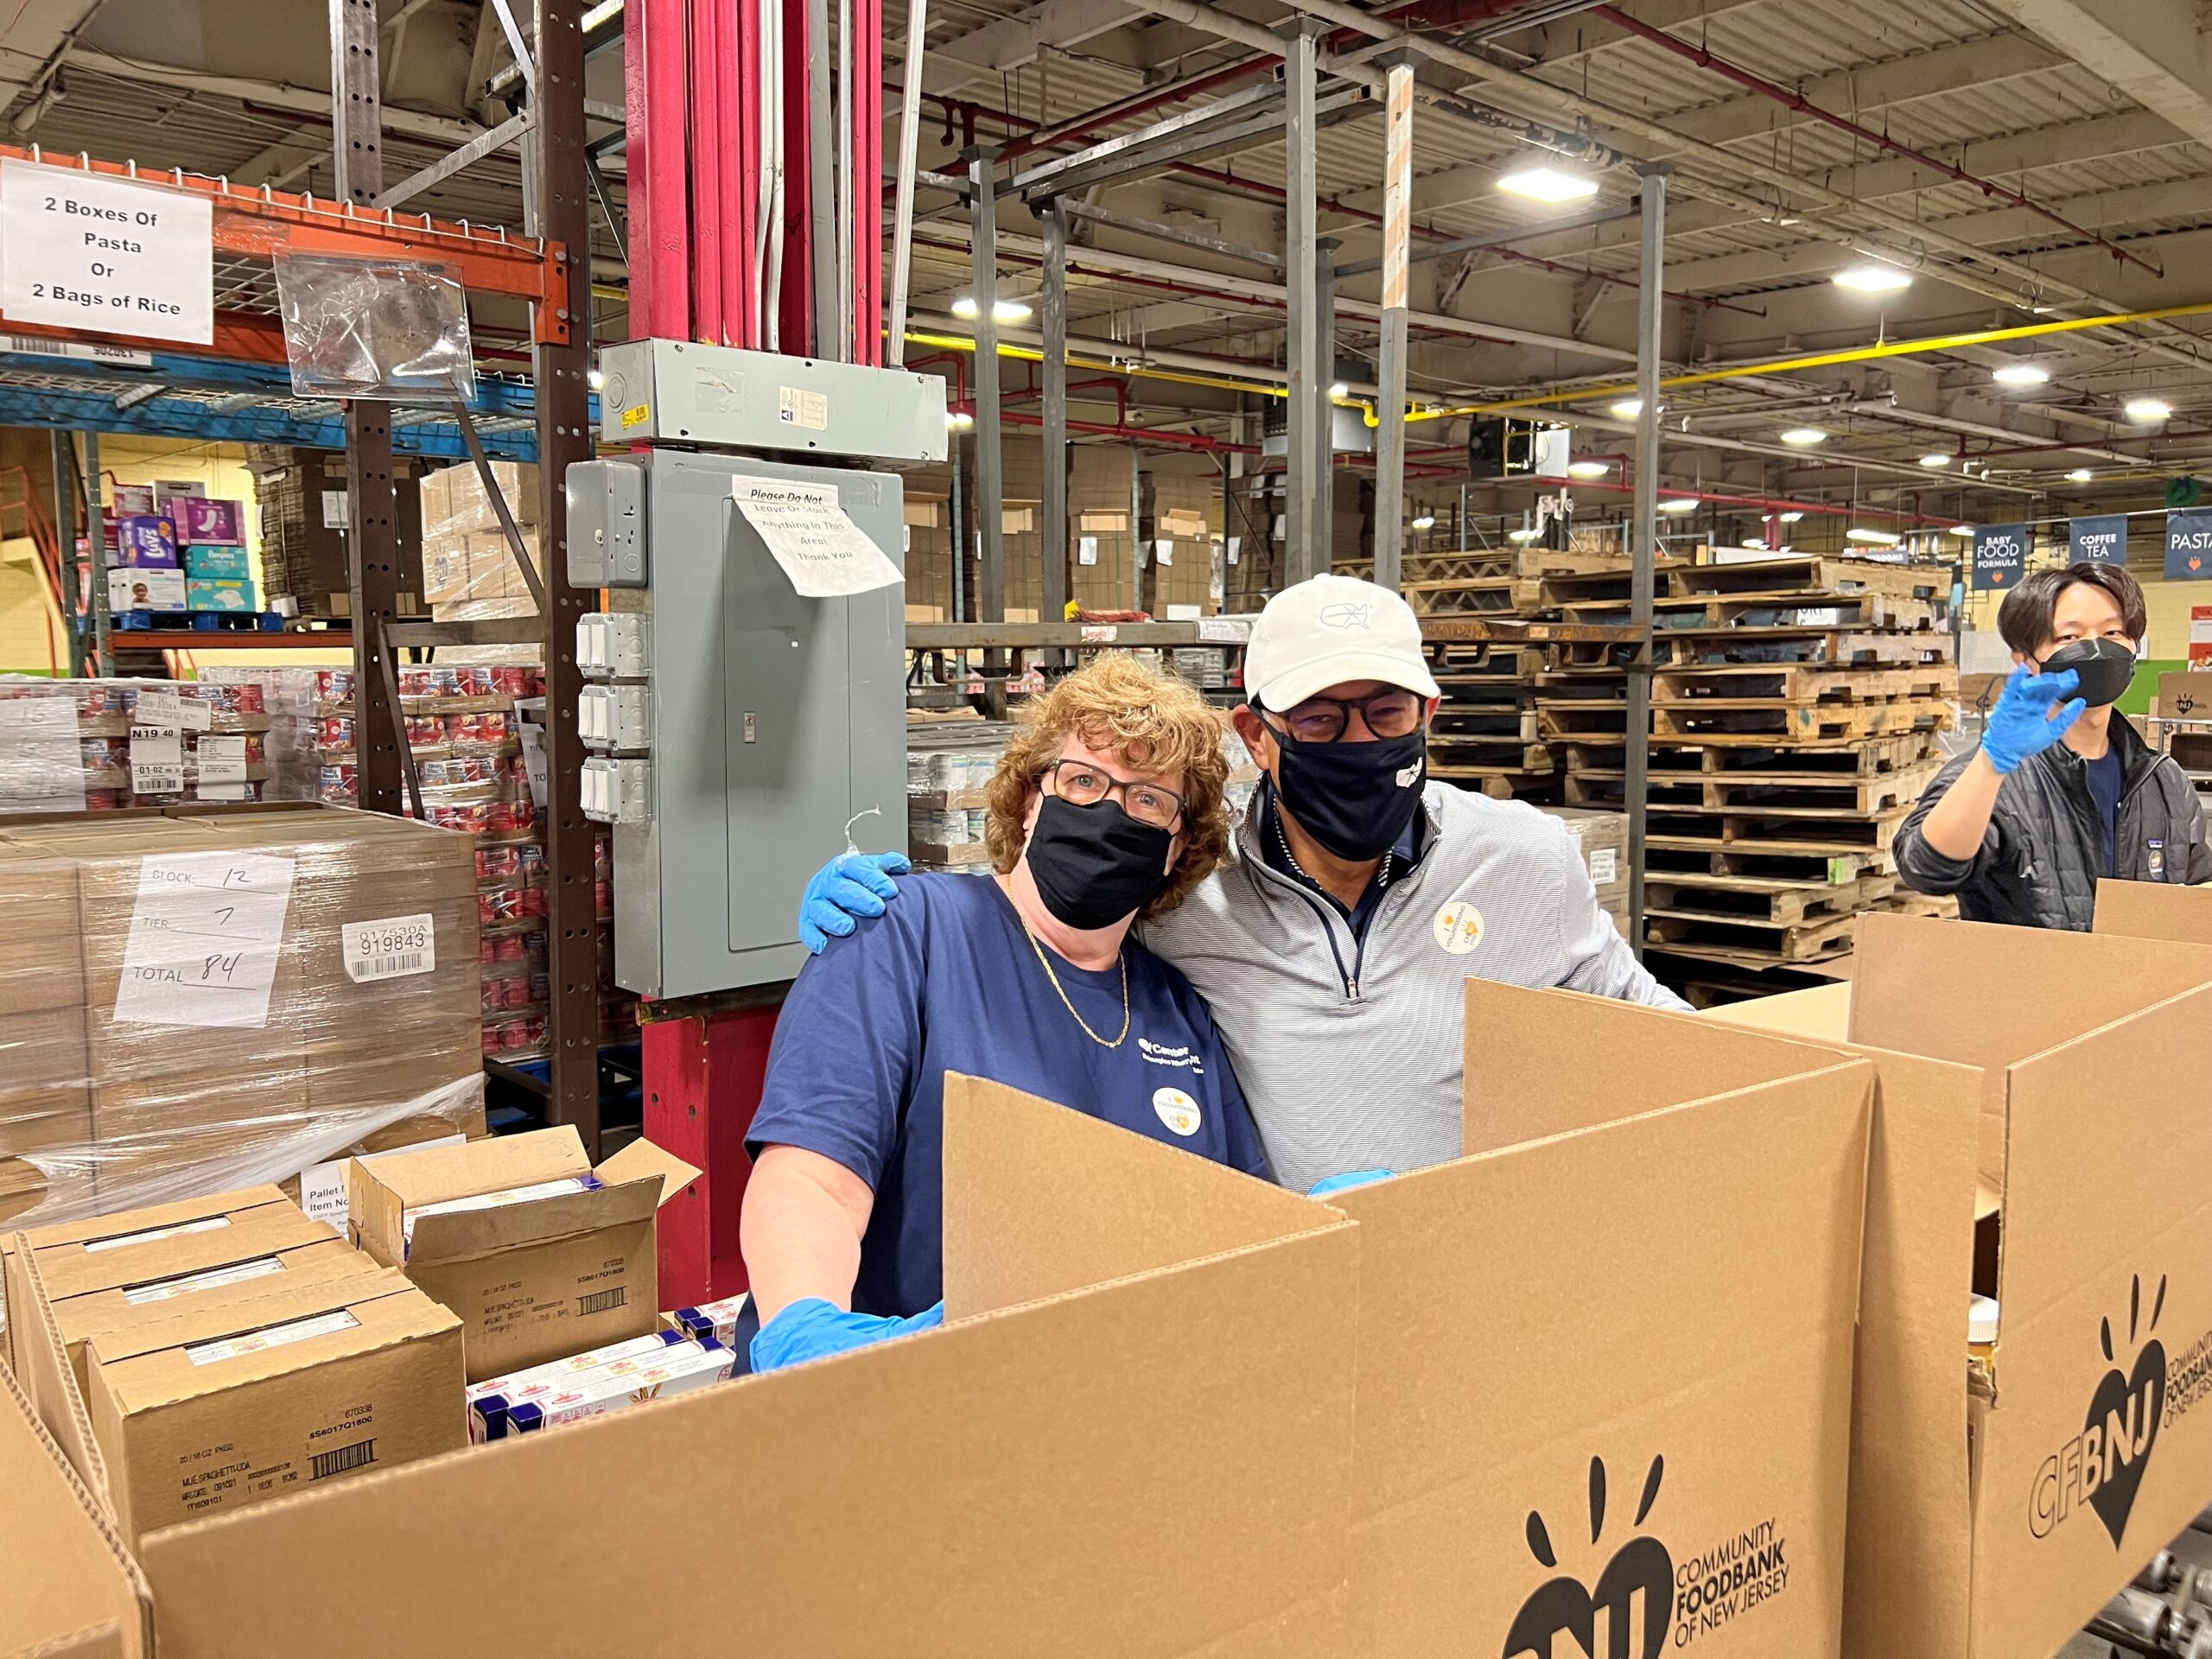 Volunteers filling boxes In warehouse with wood pallets in background